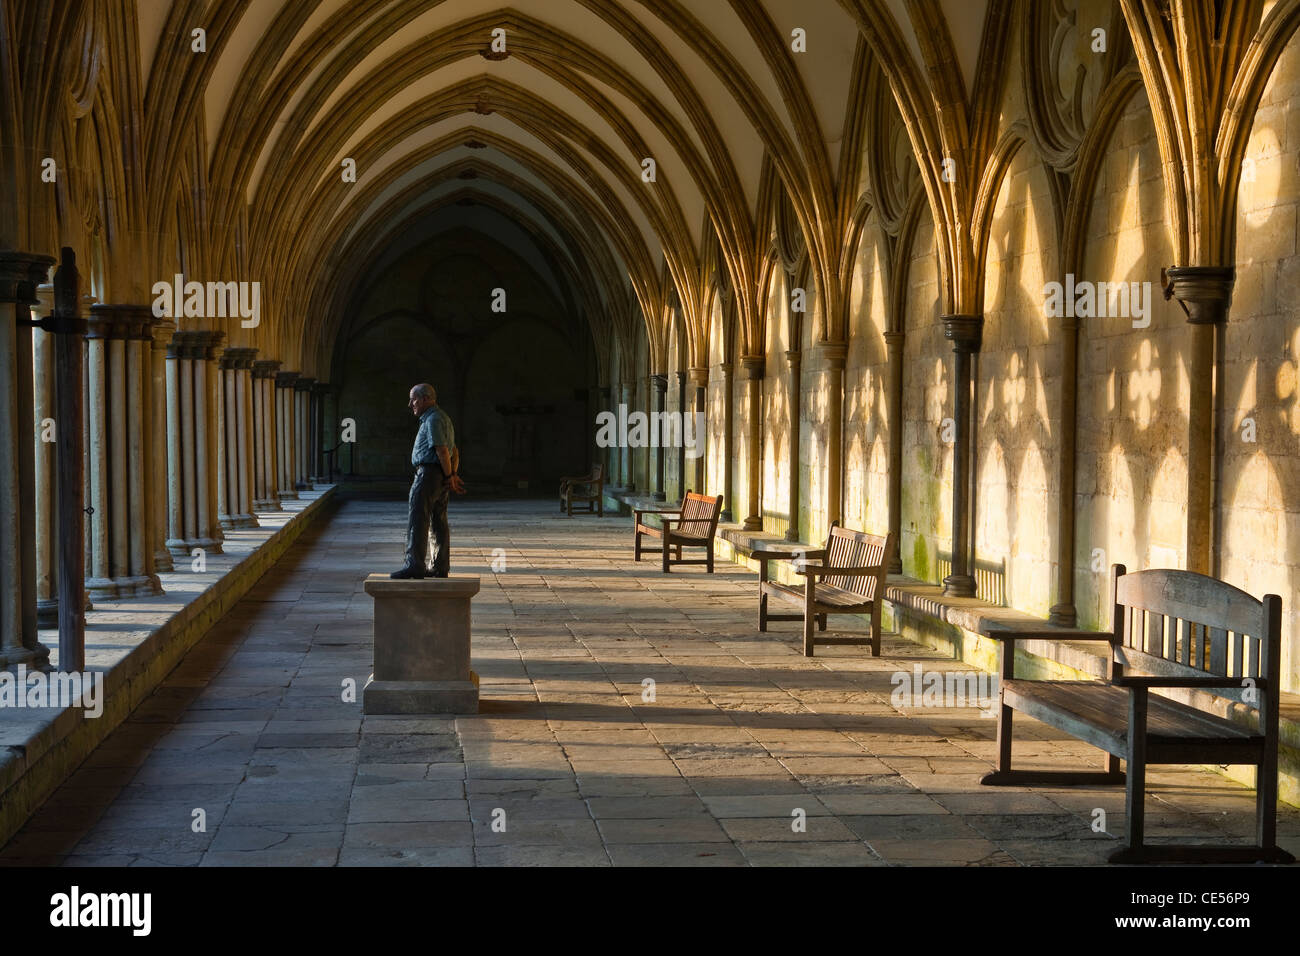 The cloisters at Salisbury cathedral in Salisbury, Wiltshire, England, UK. The statue is by Sean Henry. Stock Photo